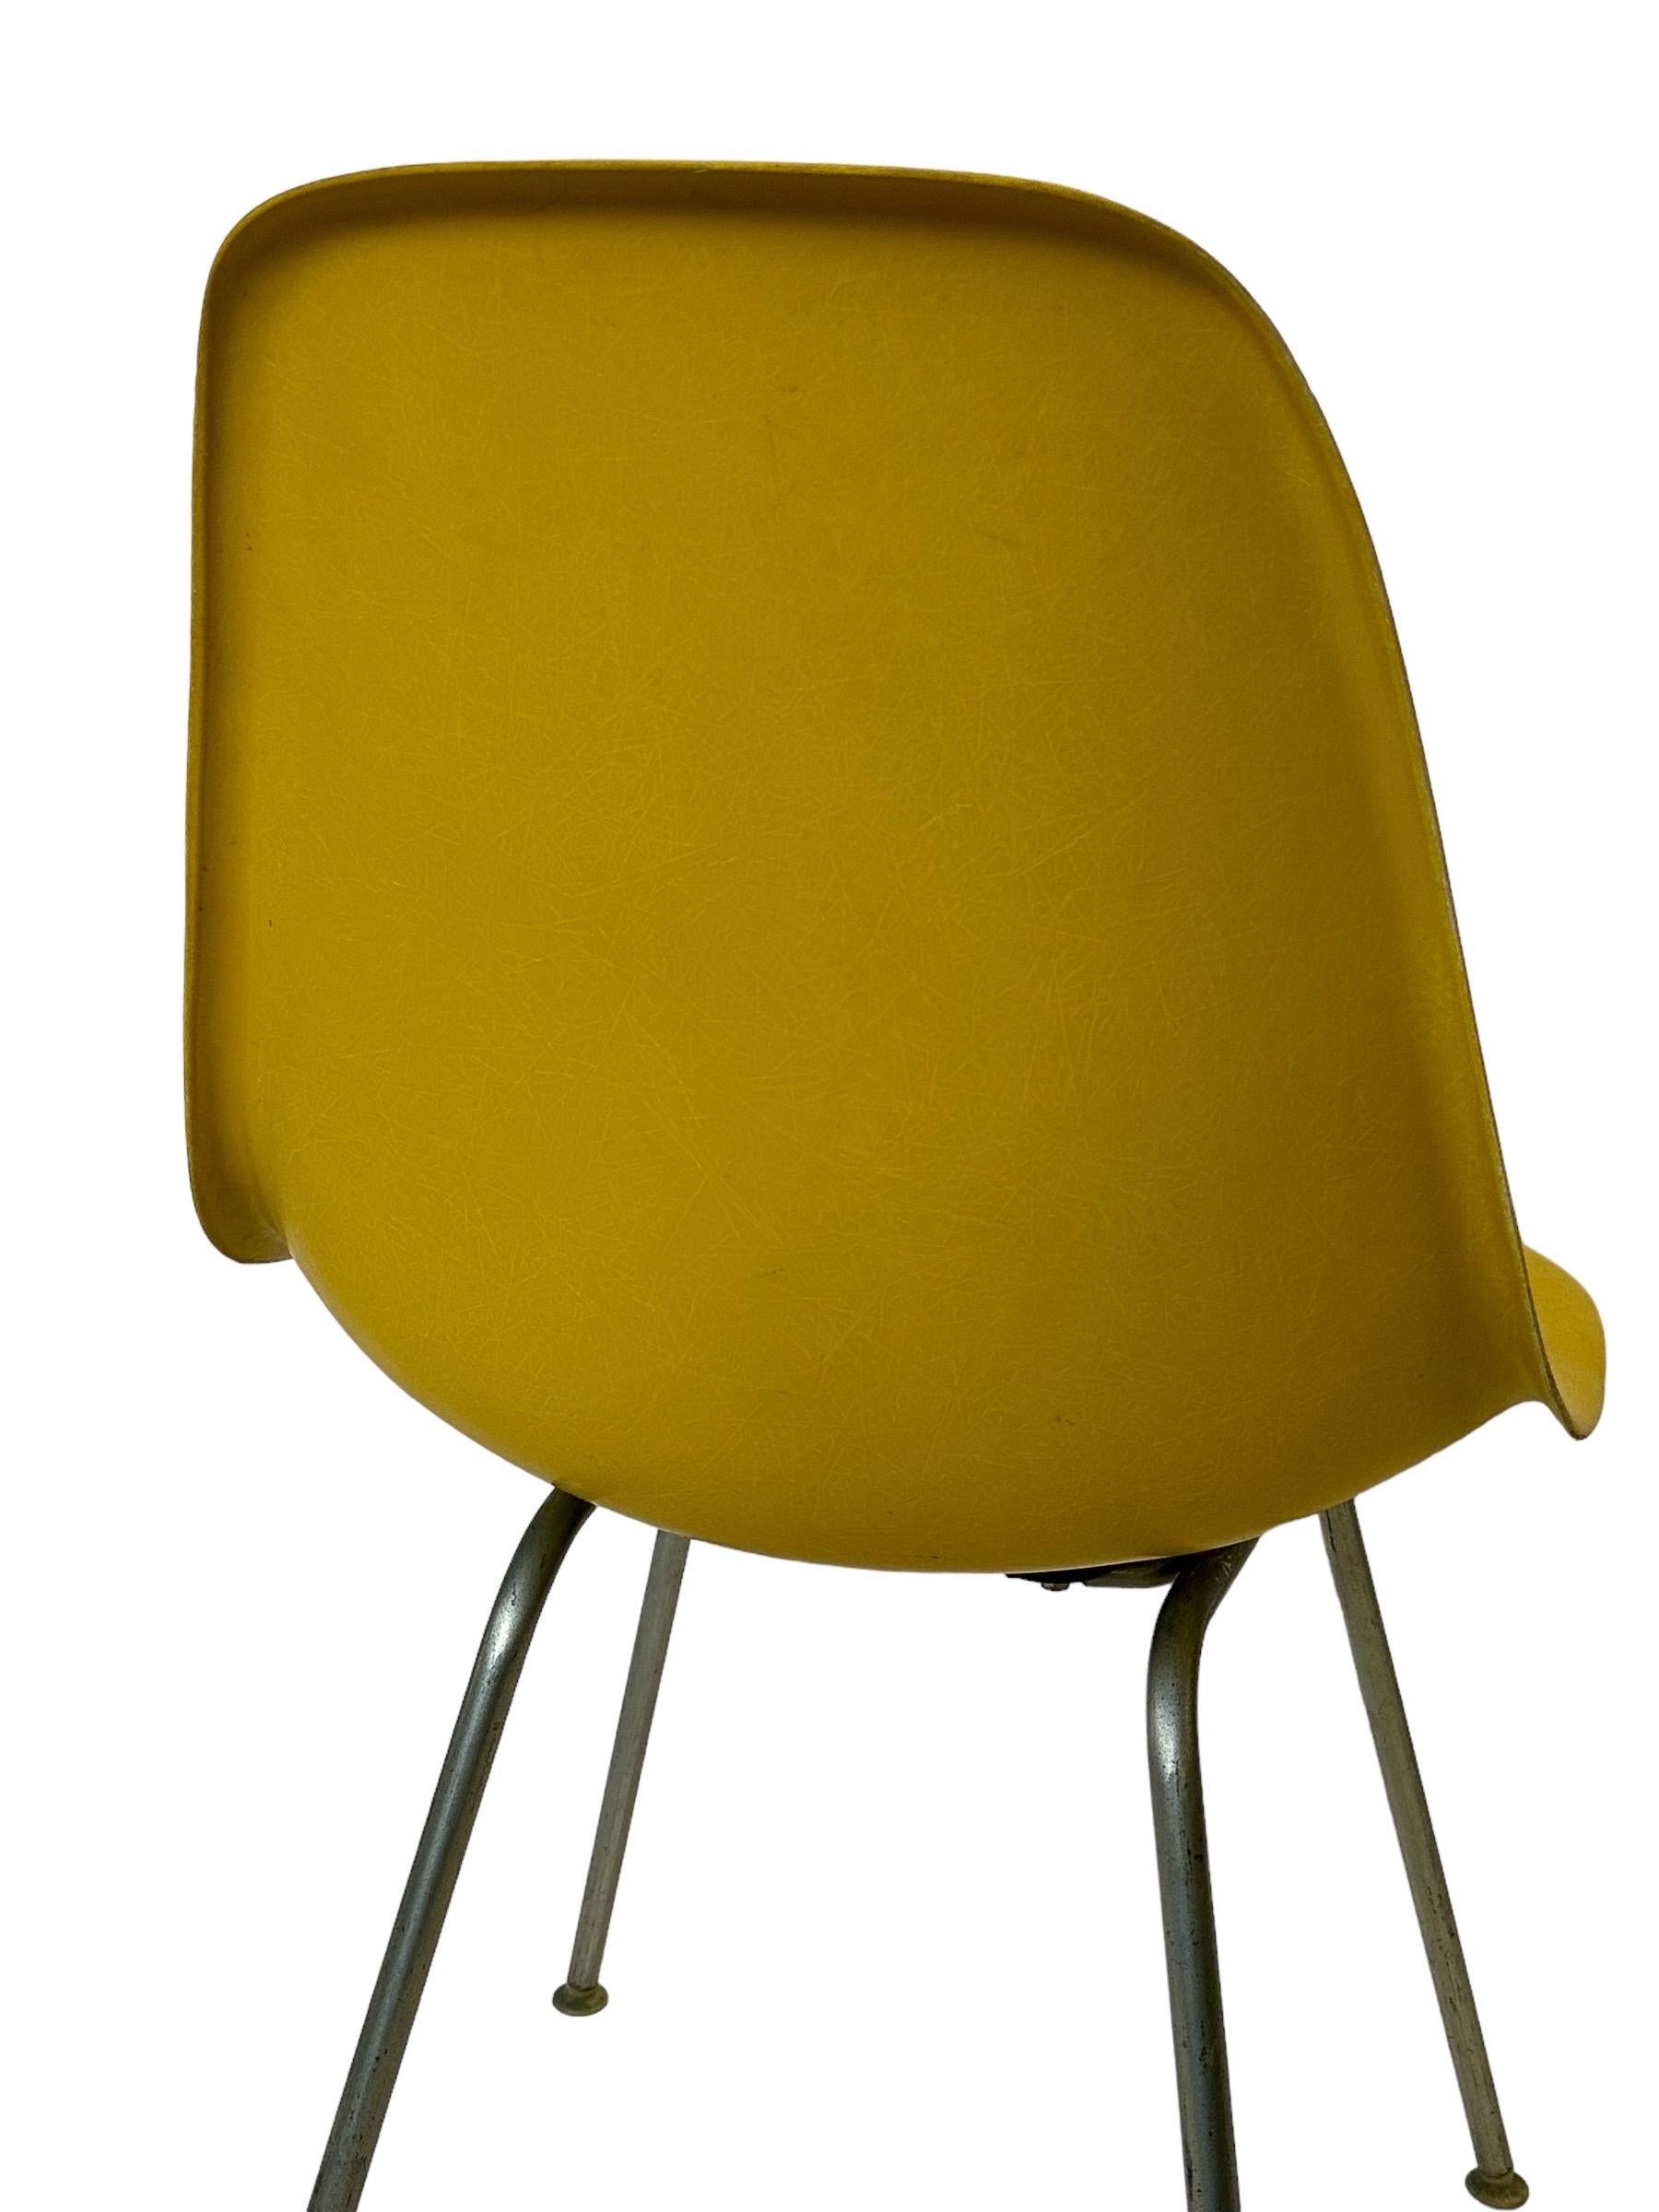 Herman Miller Eames Fiberglass Dining Chair in Brilliant Yellow For Sale 1